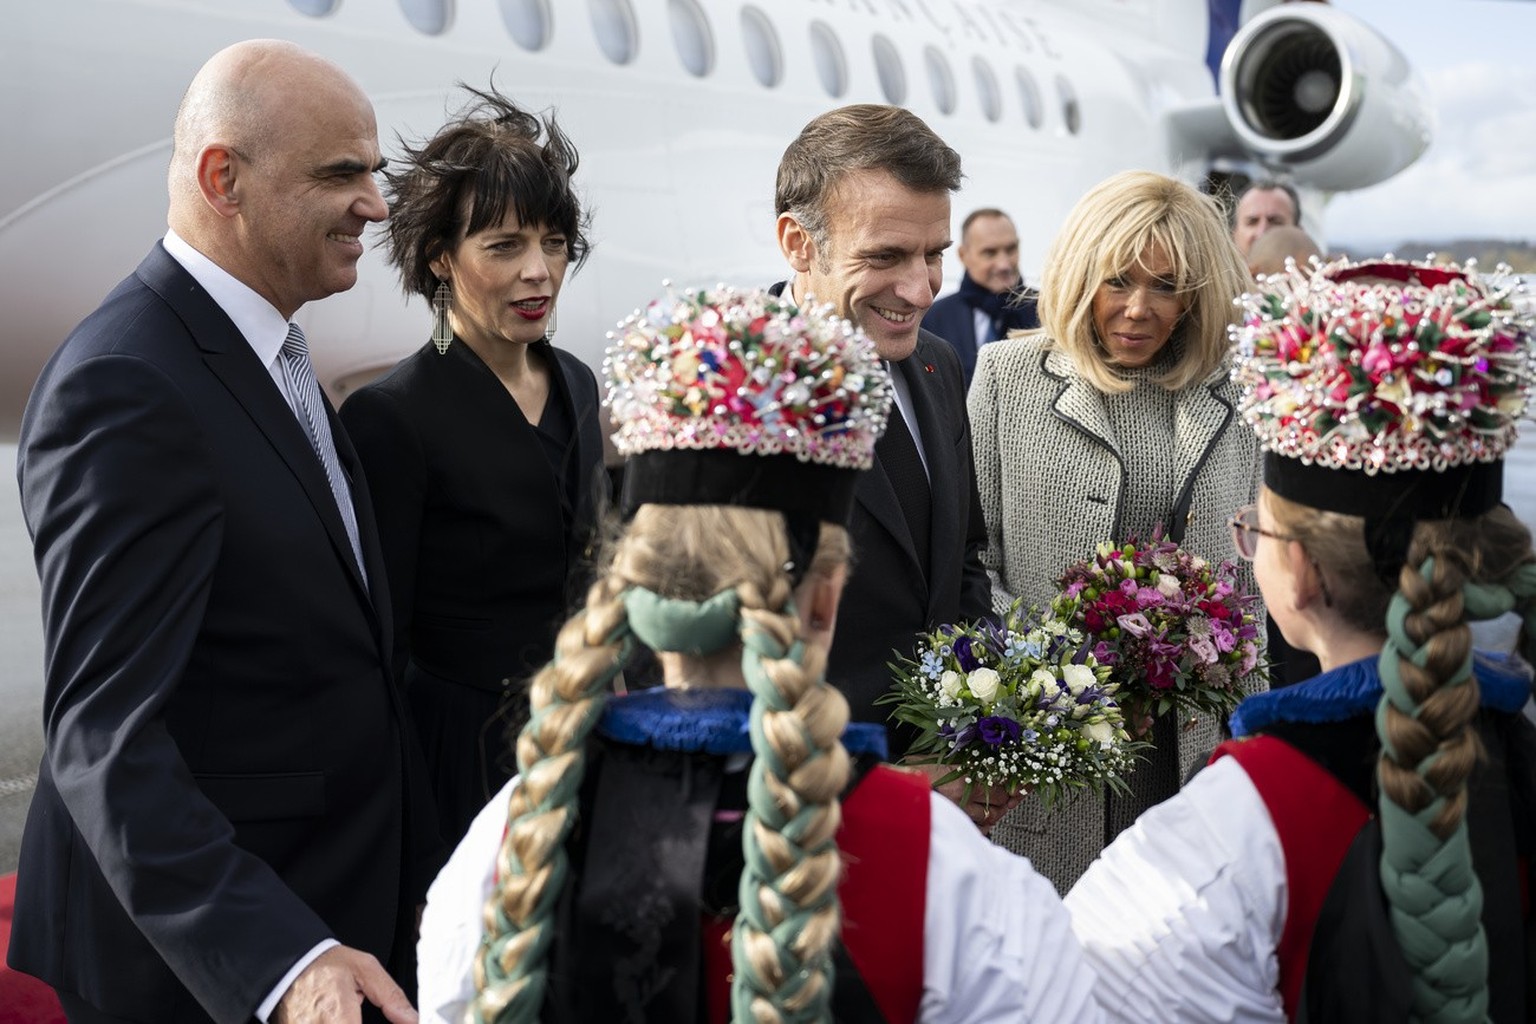 Switzerland President Alain Berset and his wife Muriel Zeender Berset, and French President Emmanuel Macron and his wife Brigitte Macron, from left to right, are welcomed by two young girl in traditio ...